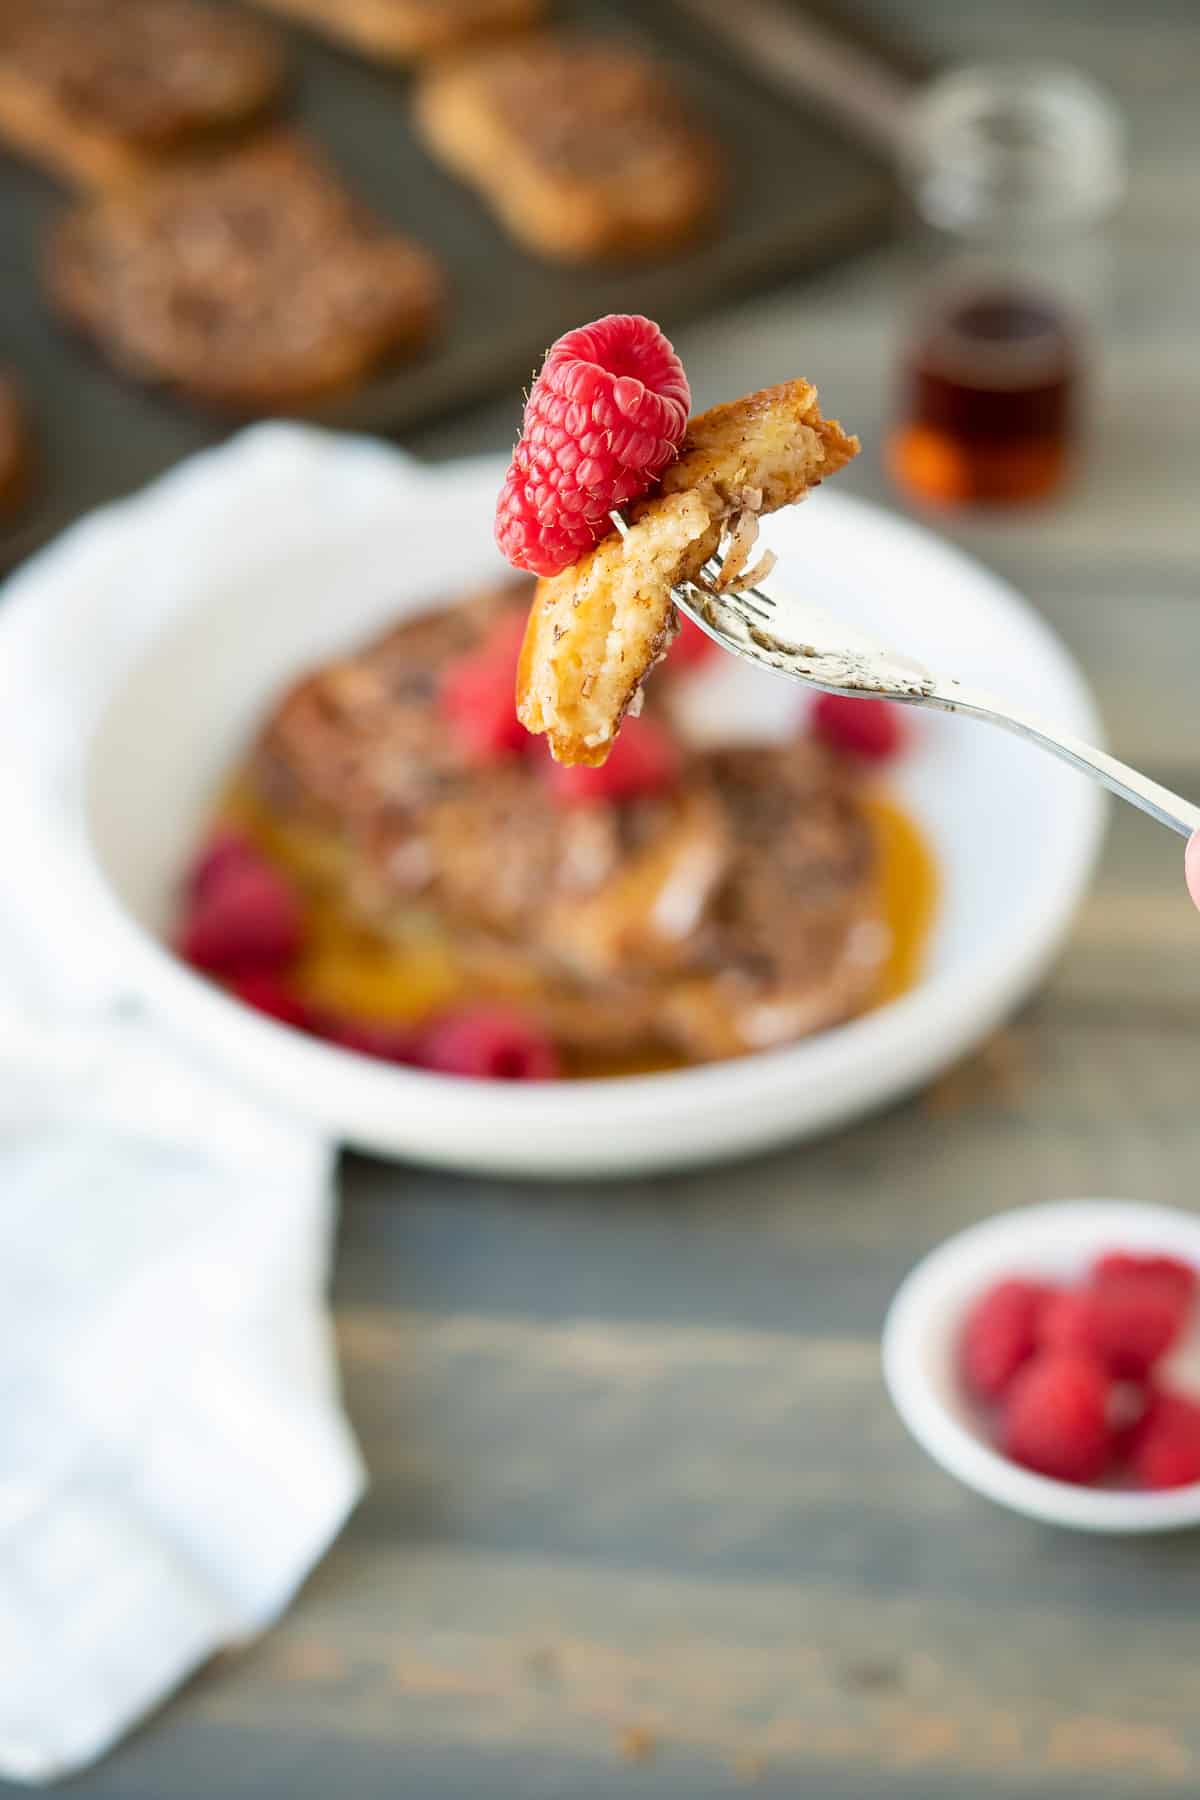 One bite of coconut crunch french toast on a fork with a fresh raspberry to show the crisp edges and soft inside!